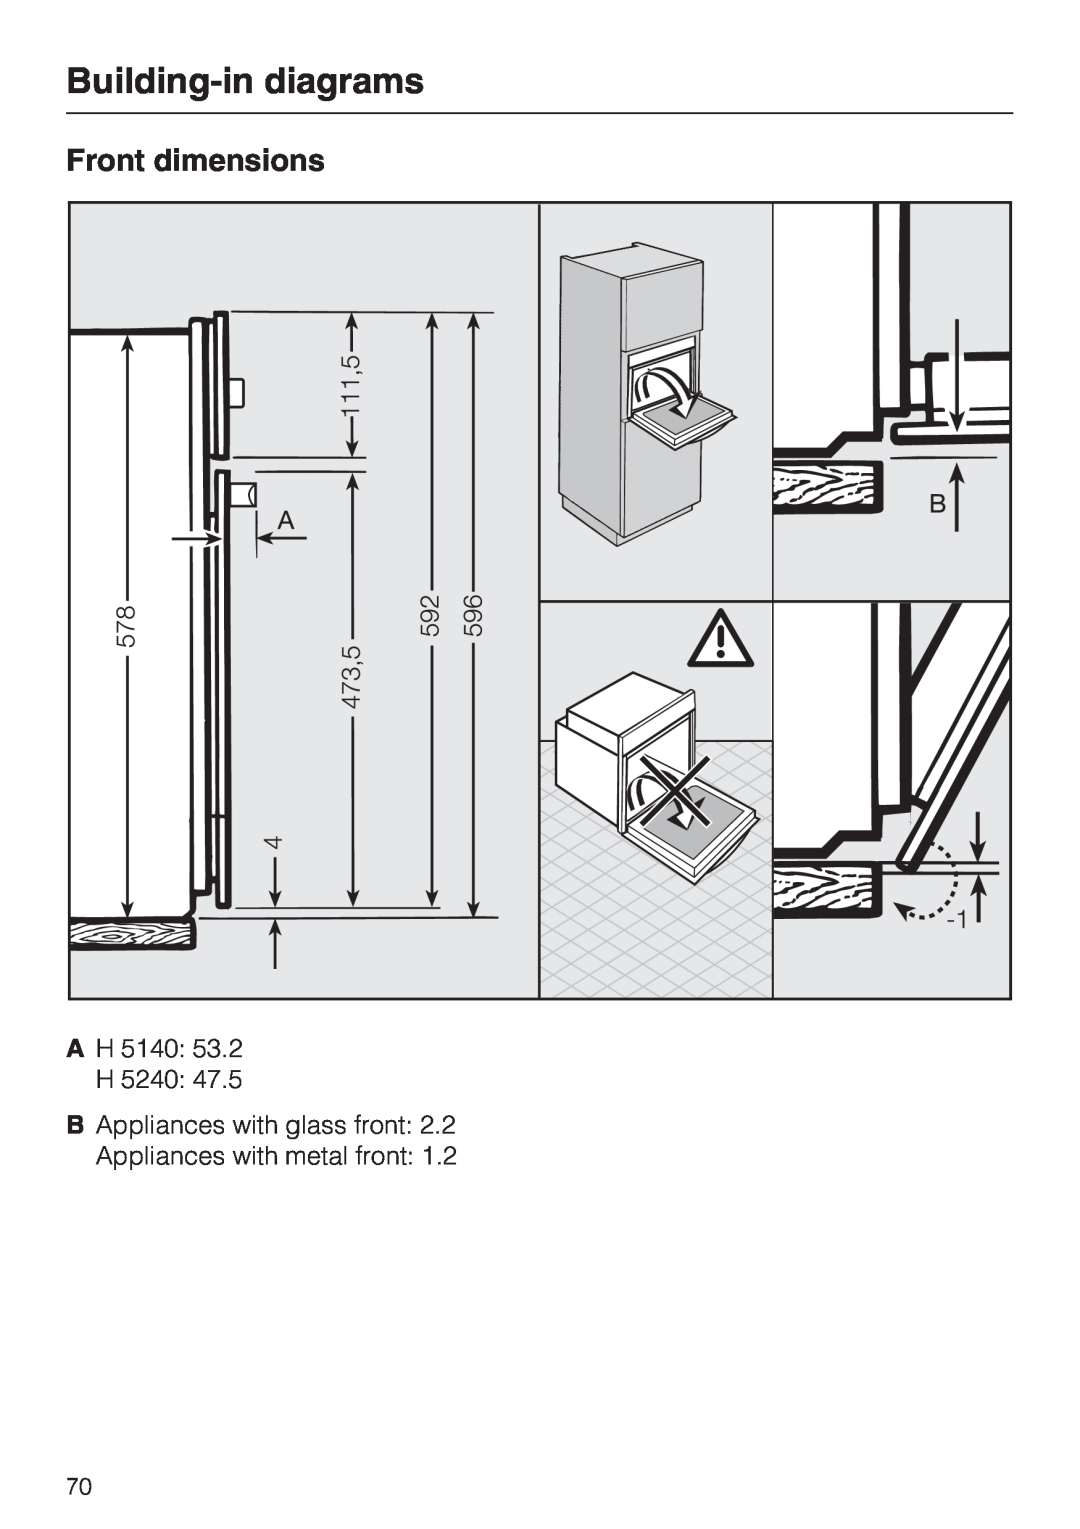 Miele H 5240 BP, H 5140 BP installation instructions Front dimensions, Building-in diagrams, 53.2, 47.5 